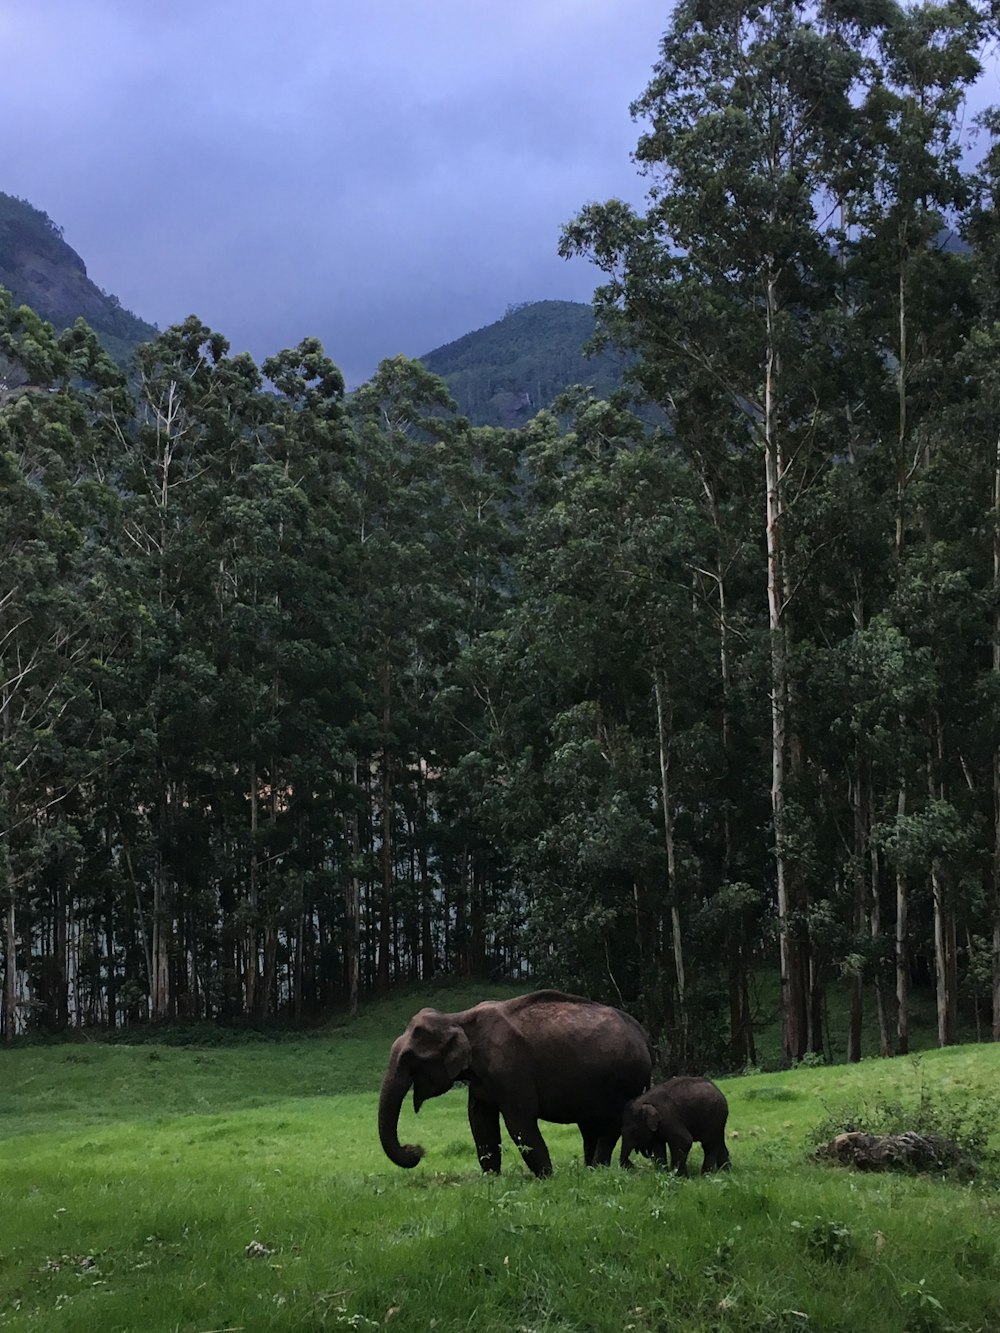 elephant eating grass near trees during daytime